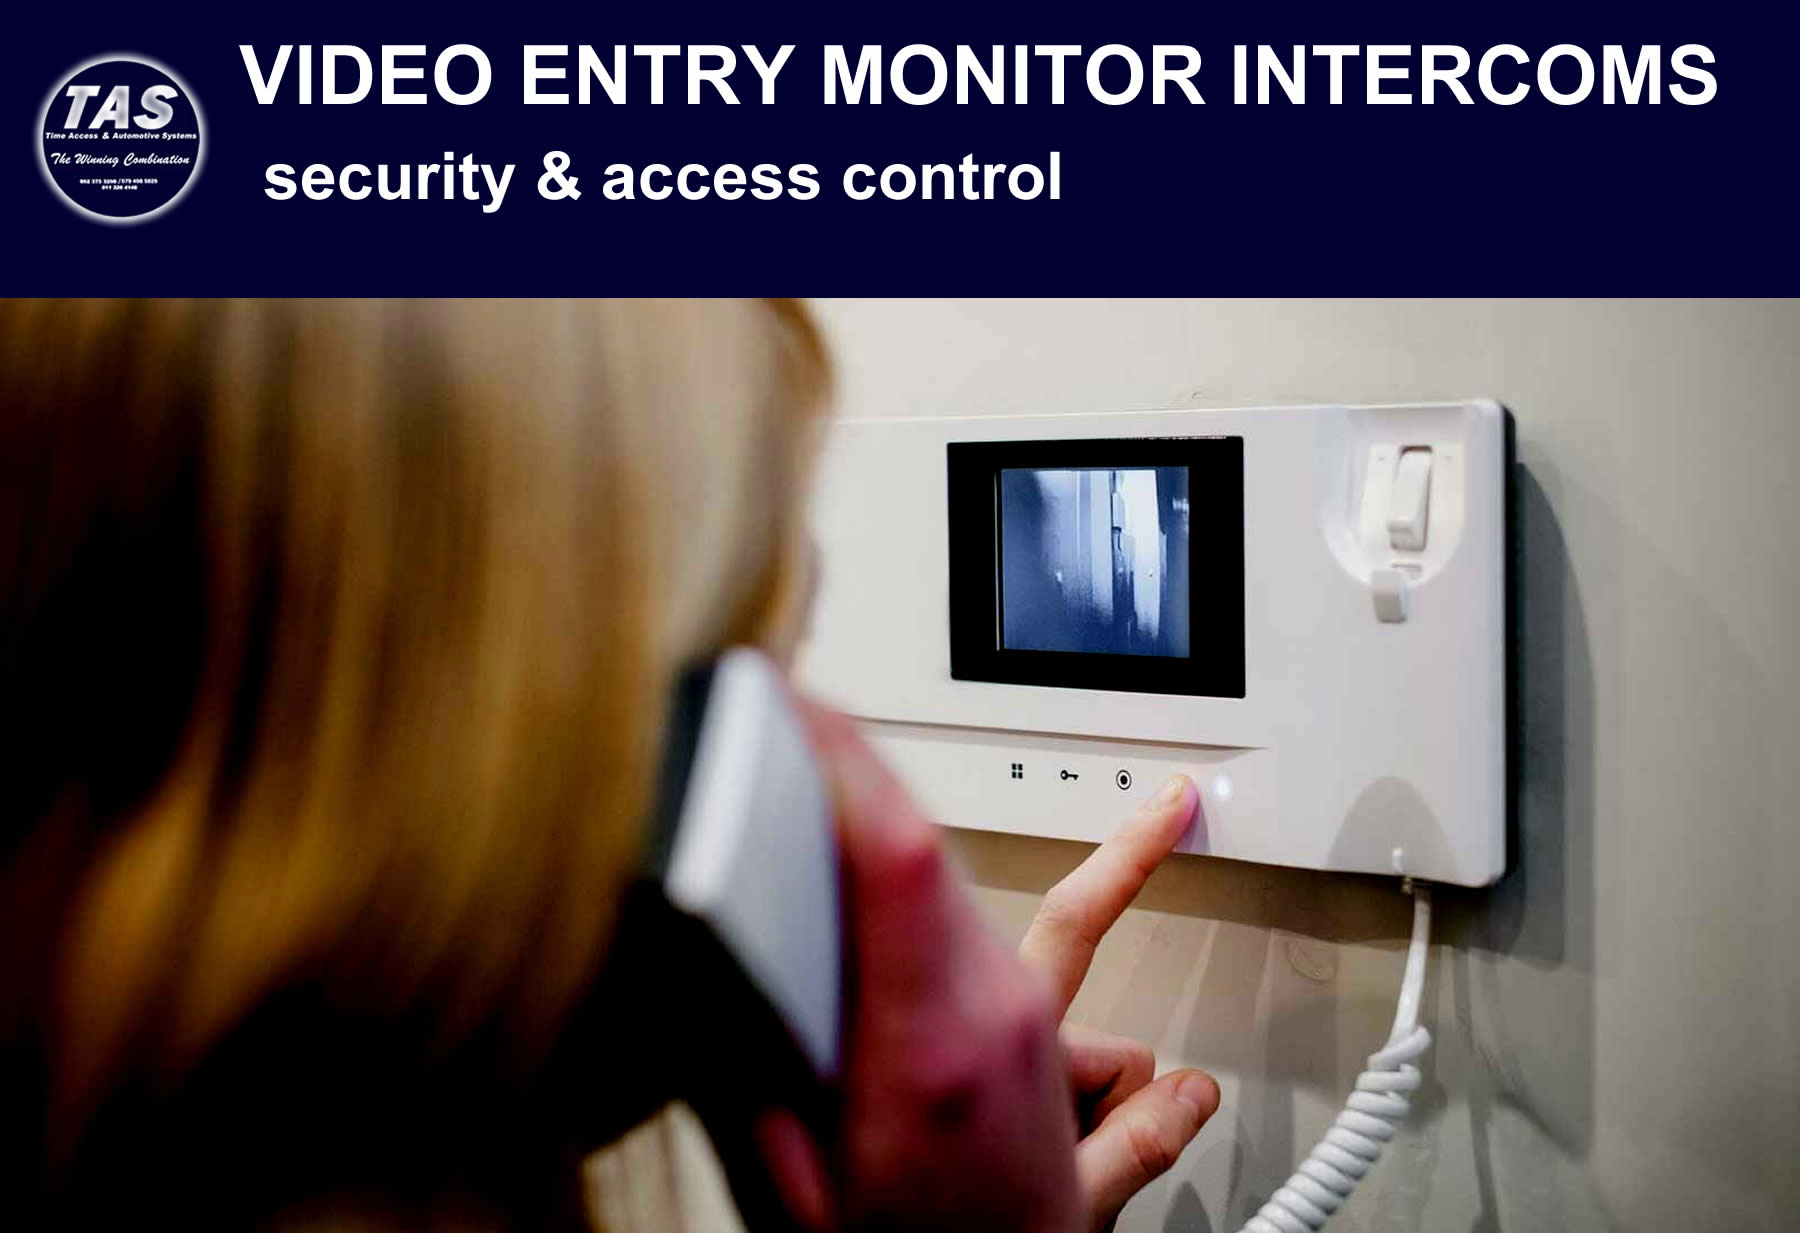 intercoms video entry monitor intercoms - security control banner